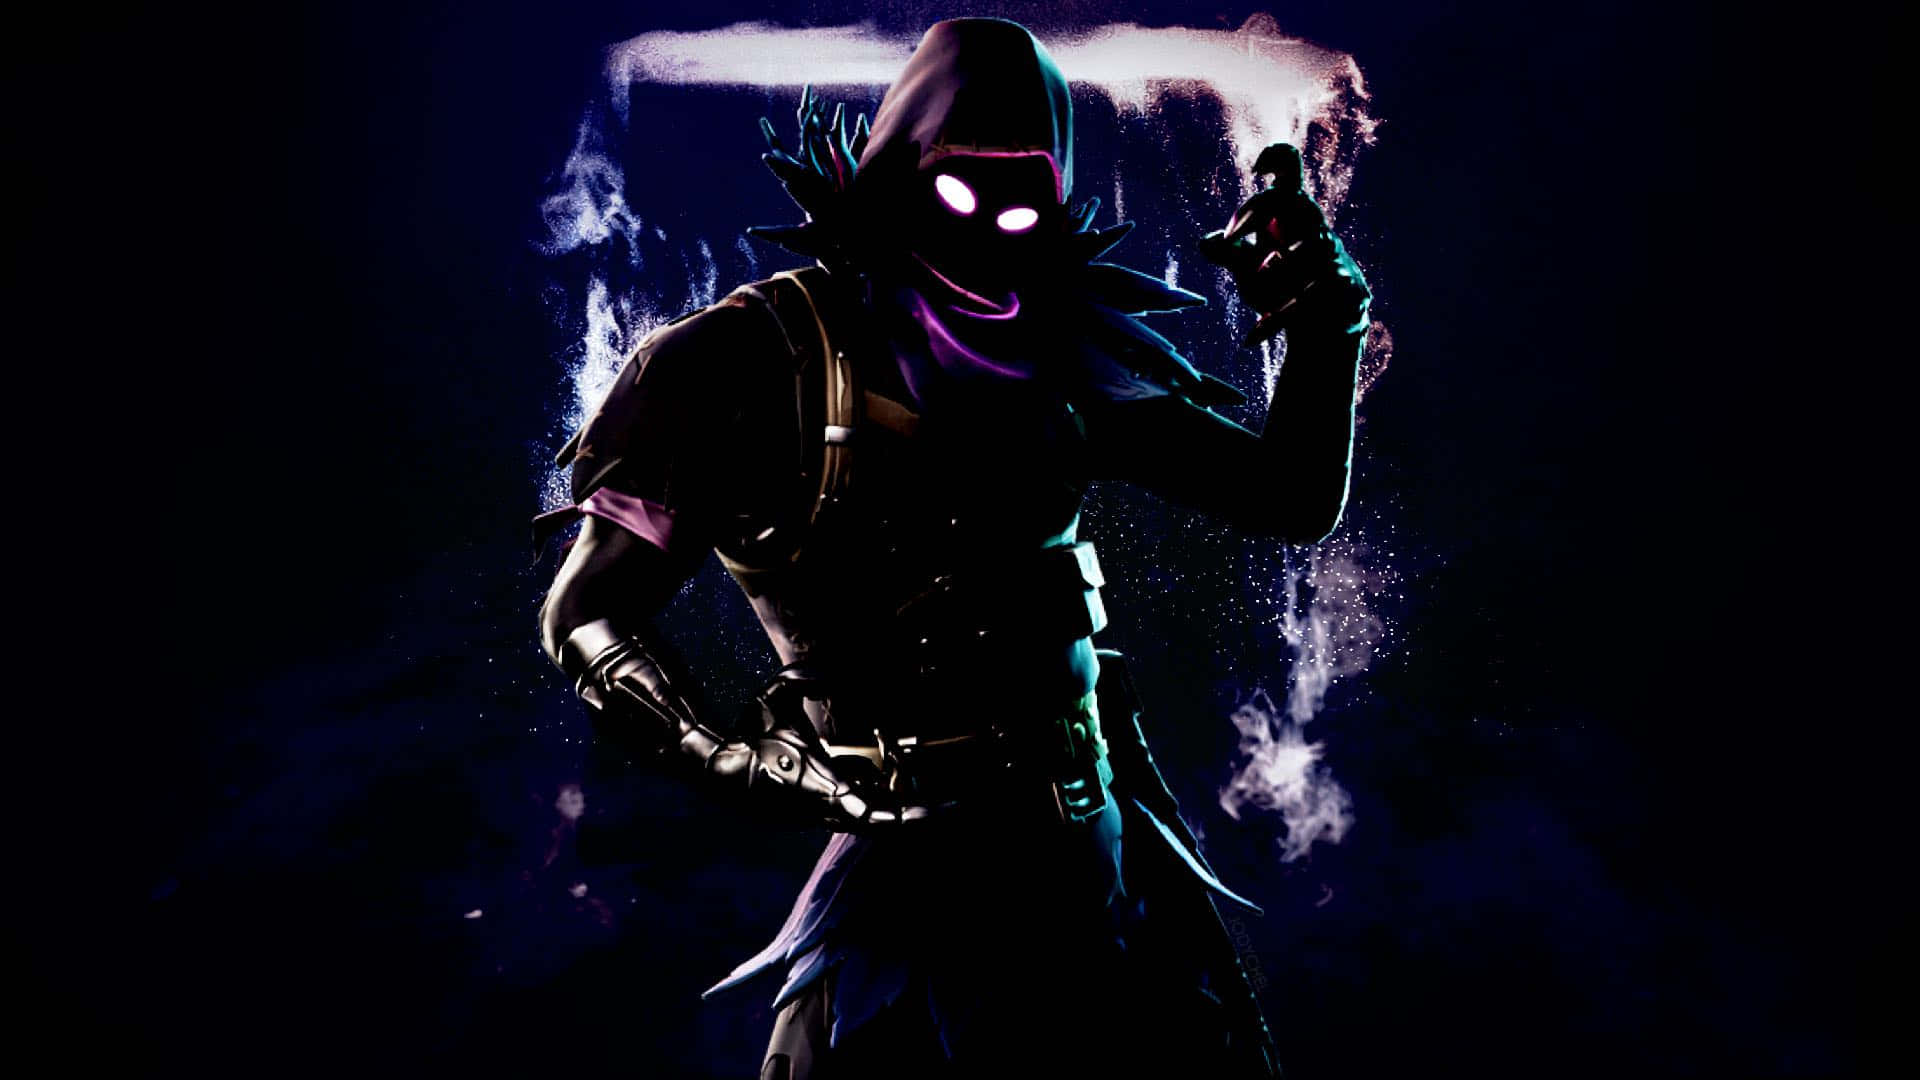 Dominate the competition with Raven Fortnite Wallpaper